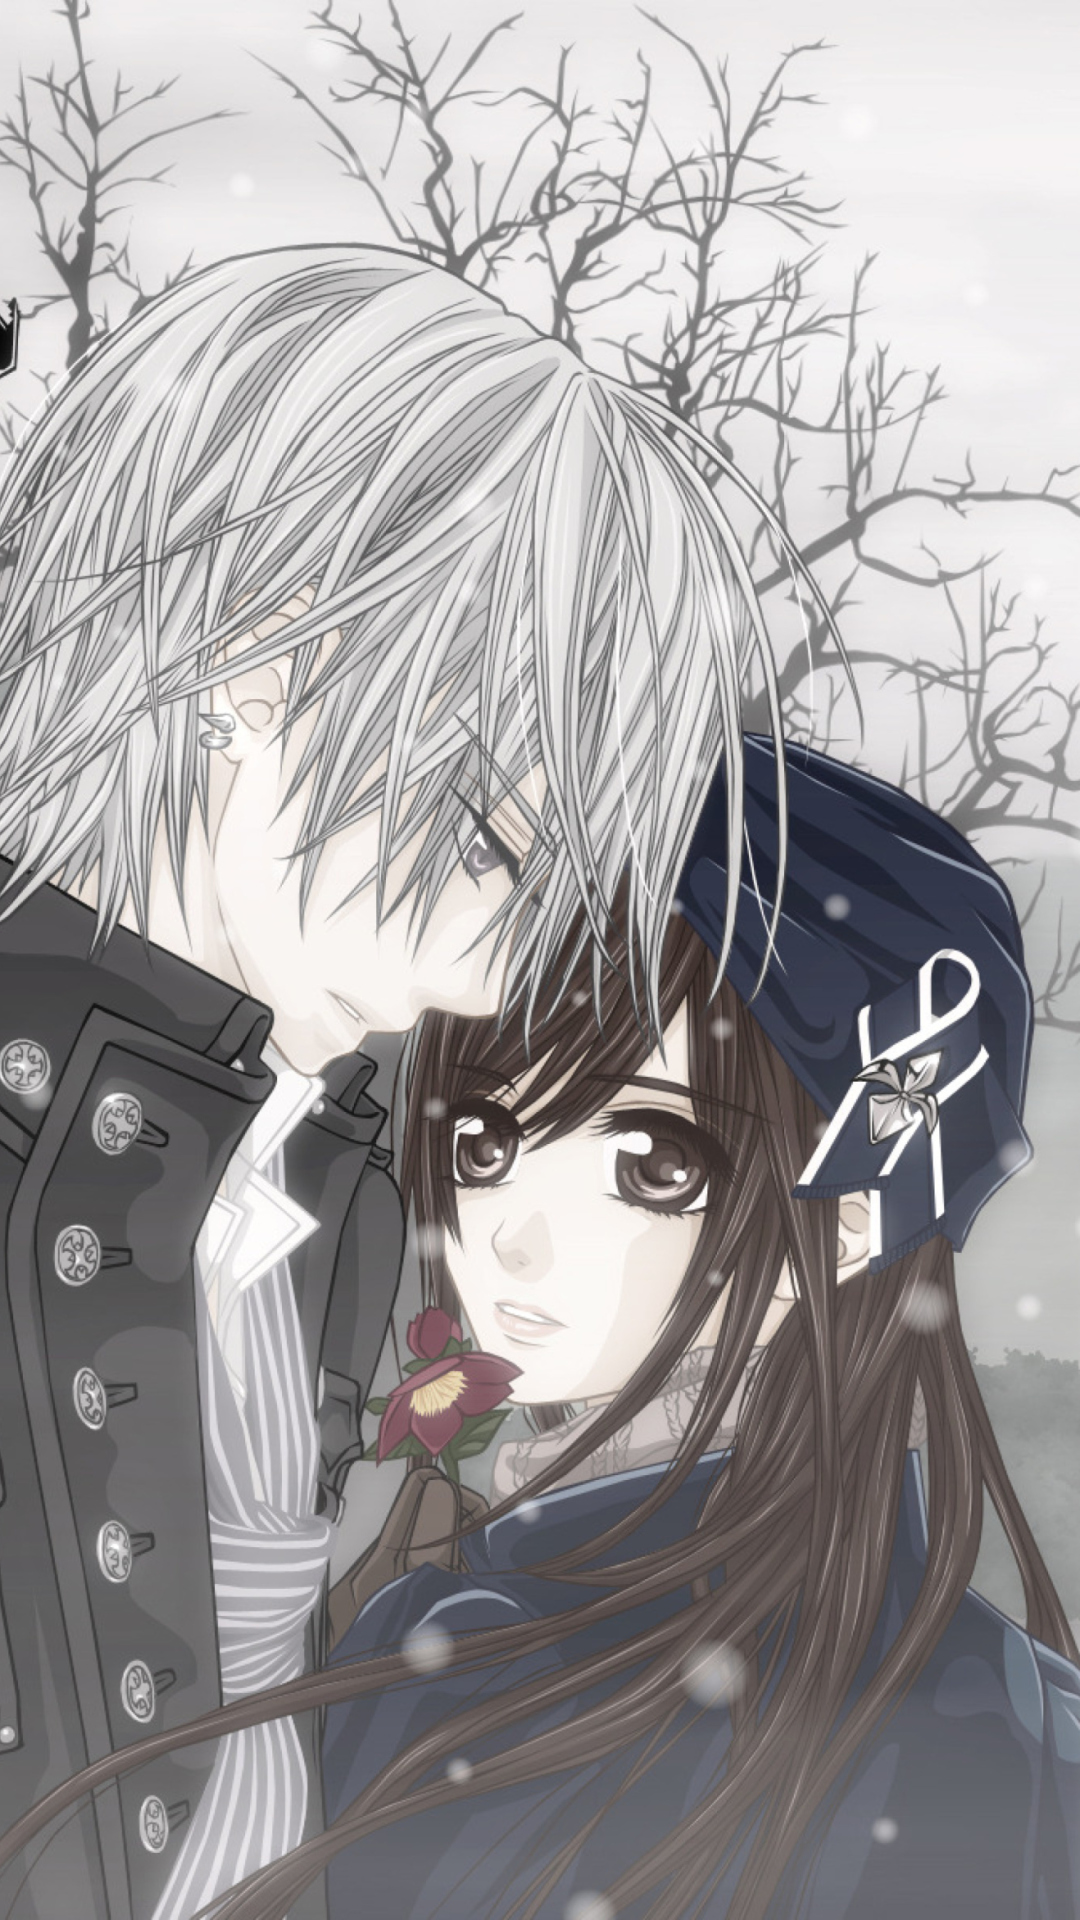 Cute Anime Couple Wallpaper for iPhone 6 Plus